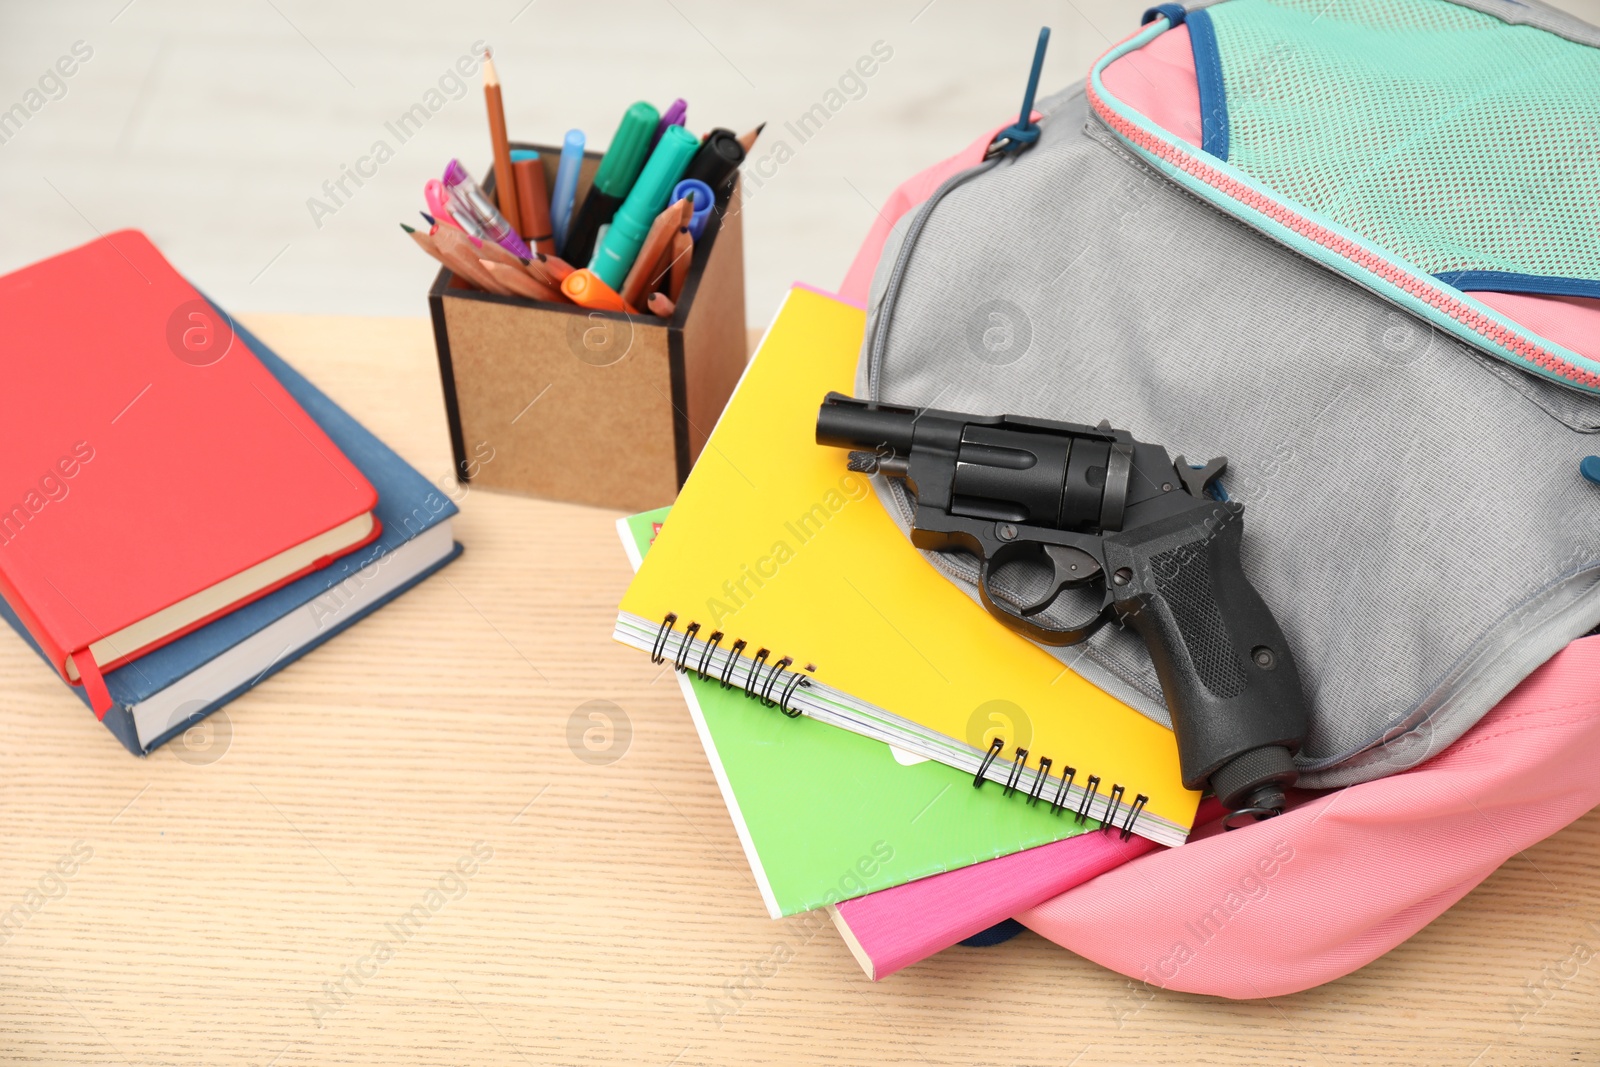 Photo of School stationery and gun on wooden desk, closeup